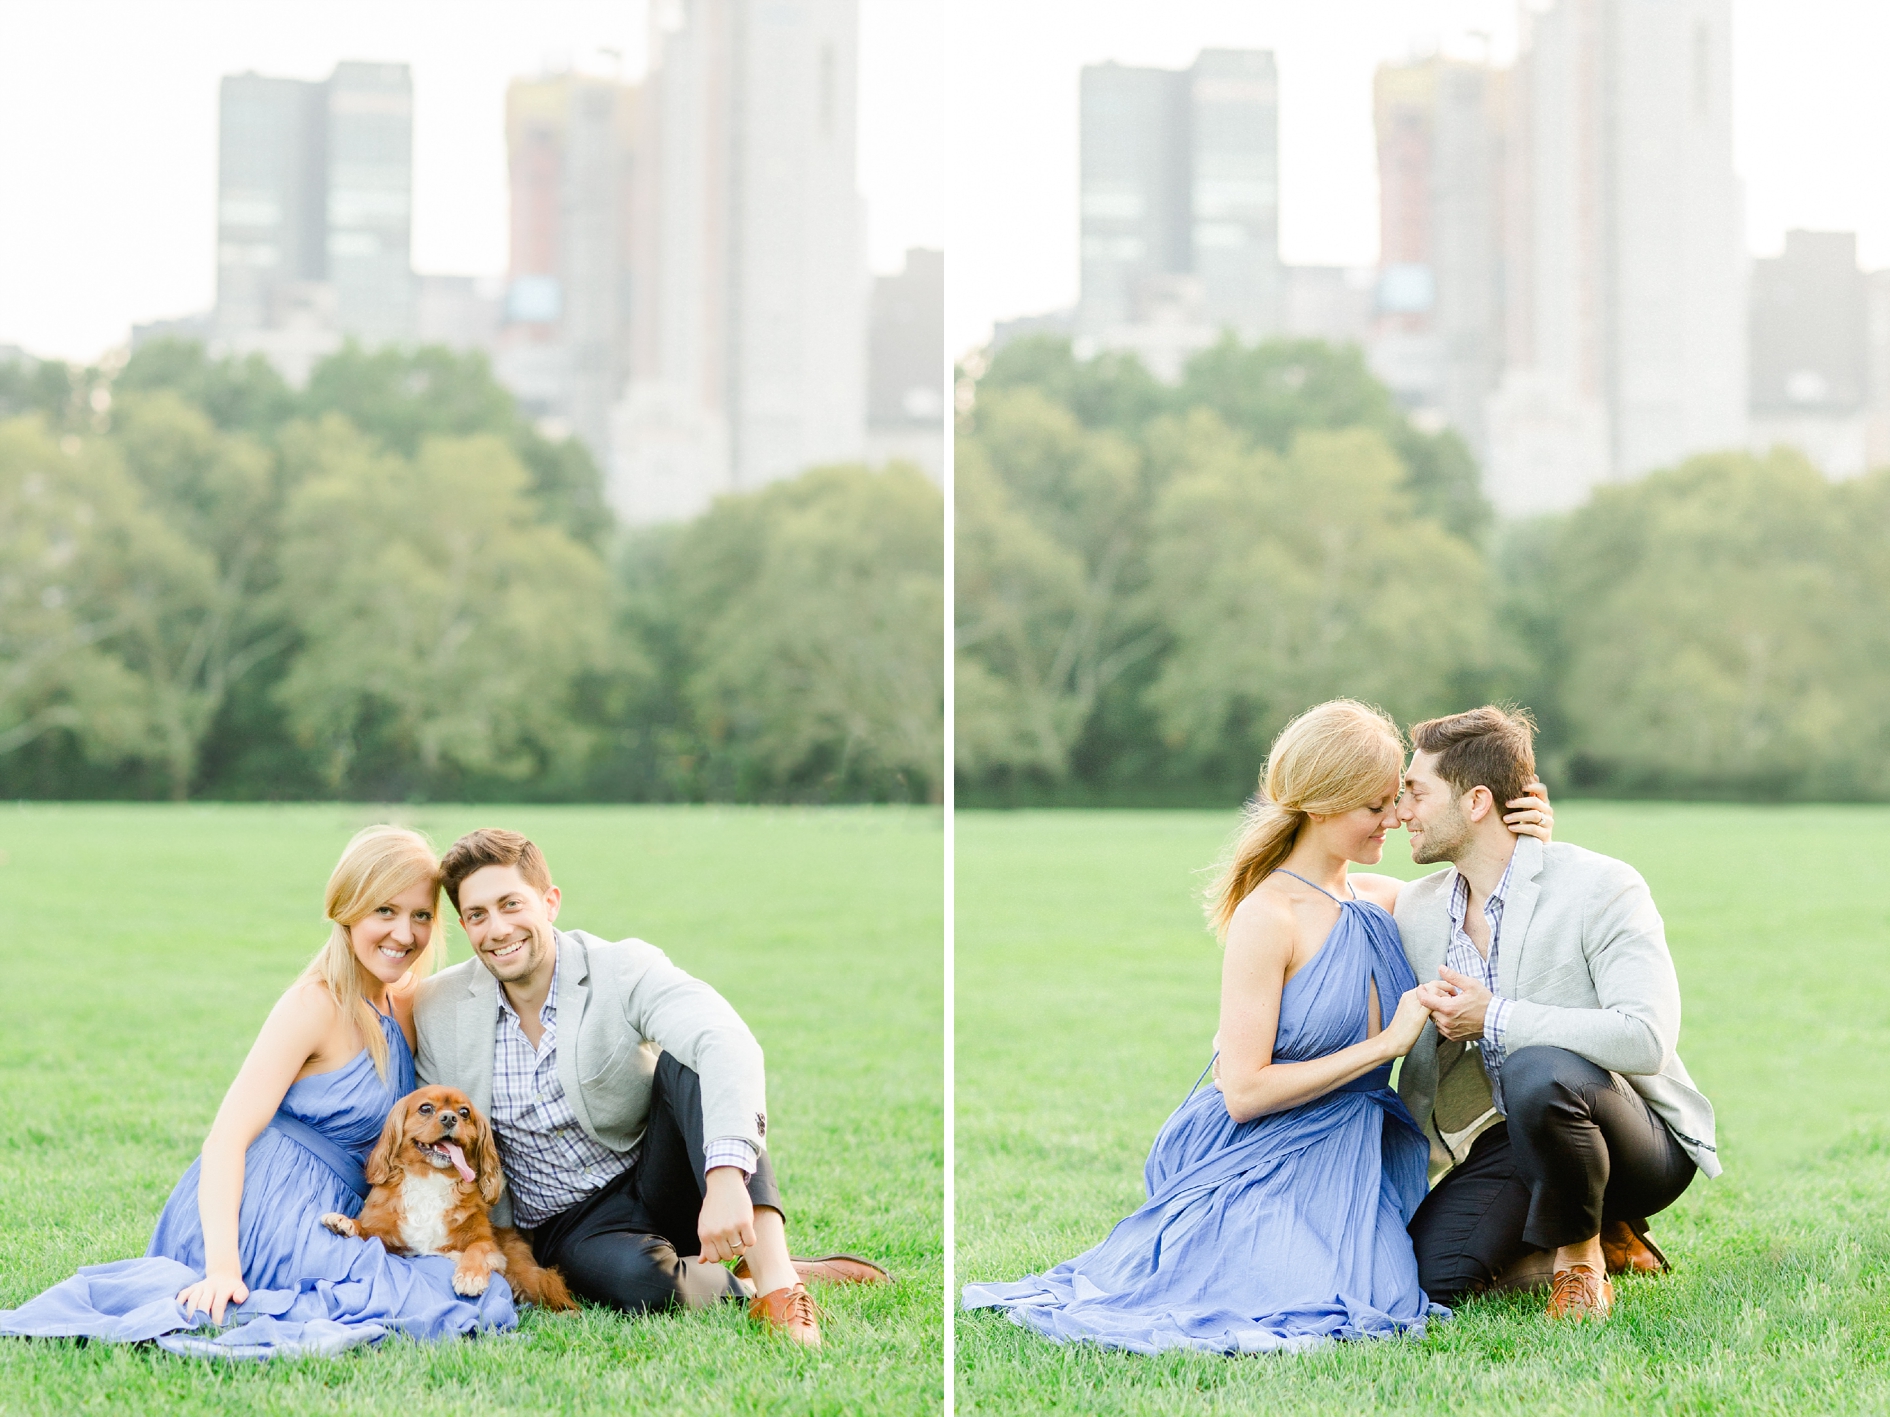 Central Park Engagement | Jenna and Chad | © Ailyn La Torre Photography 2017